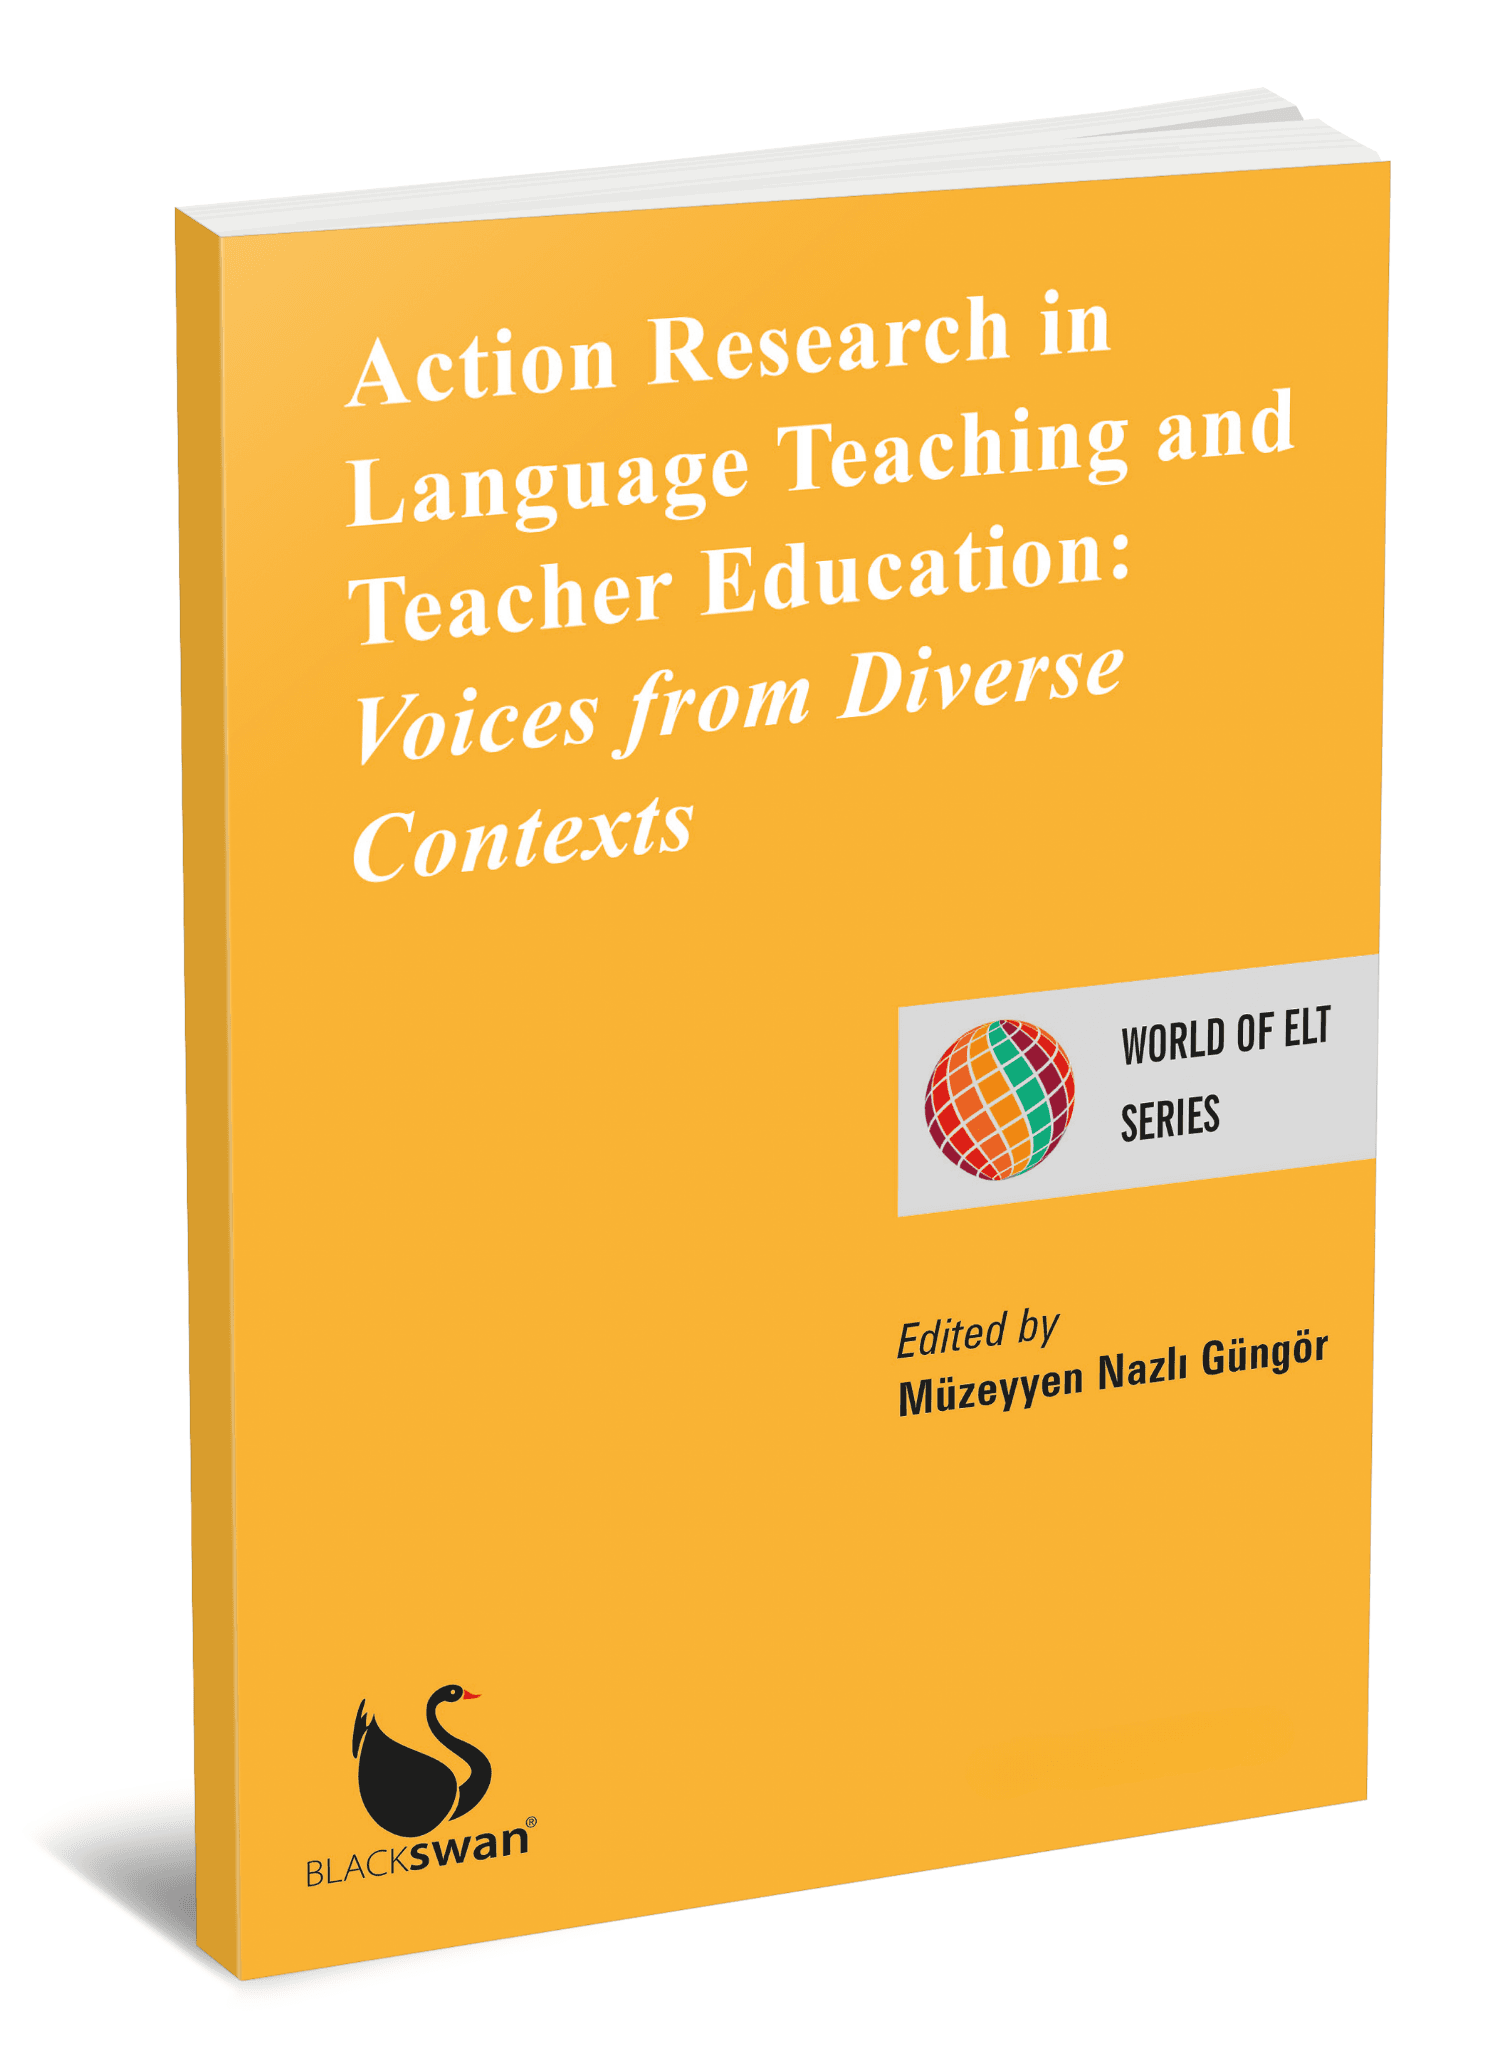 Action Research in Language Teaching and Teacher Education: Voices from Diverse Contexts